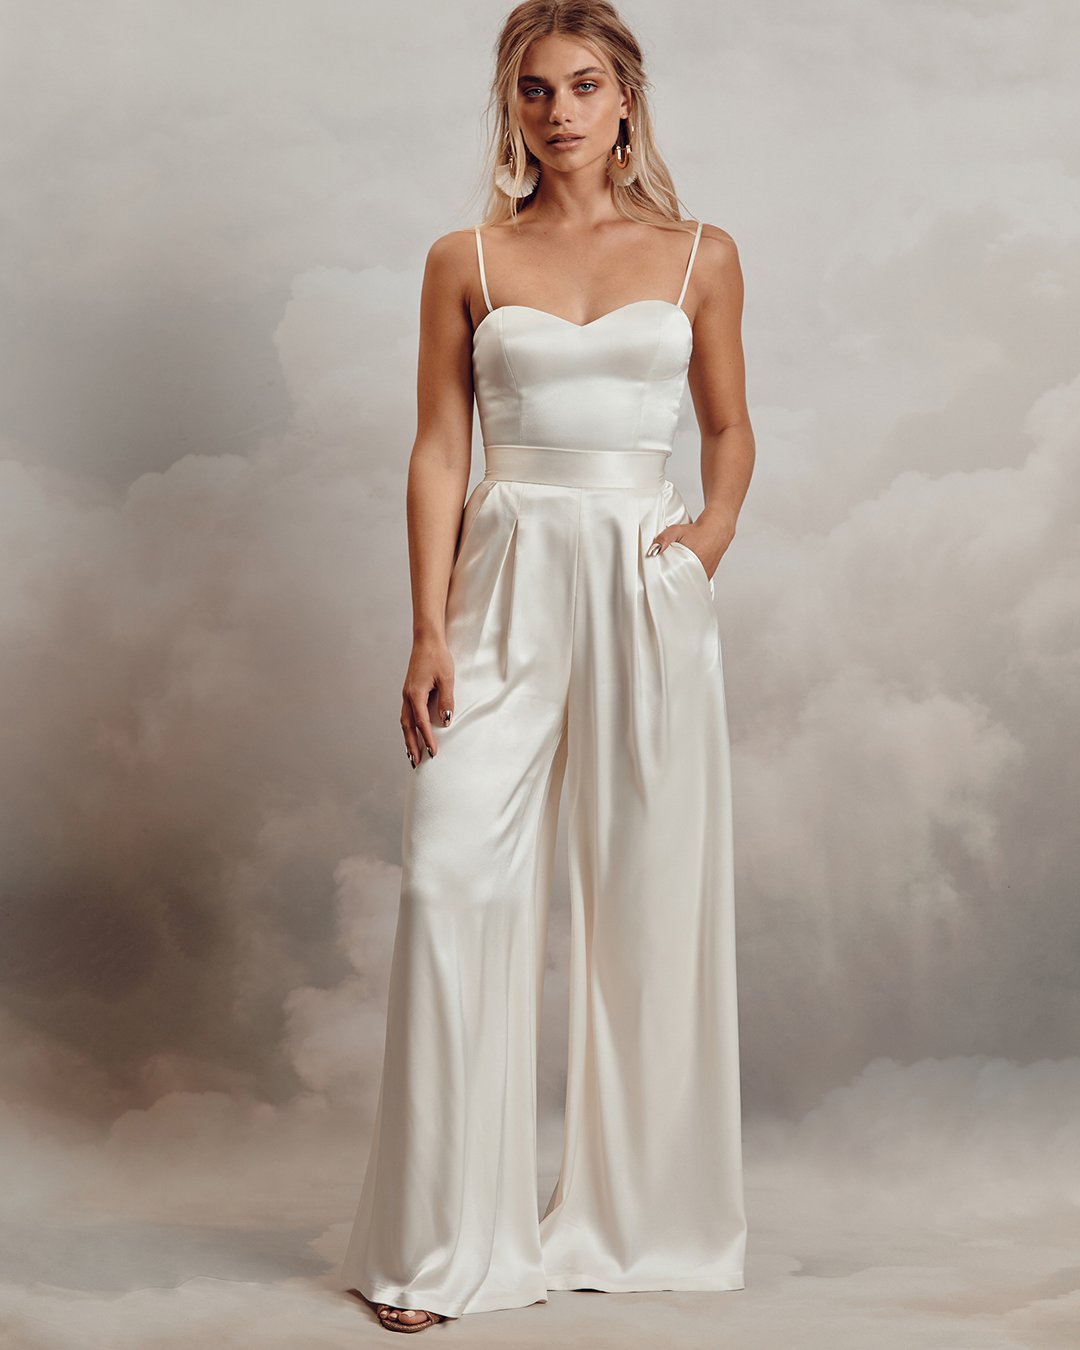 casual wedding dresses simple jumpsuits with spaghetti straps catherine deane